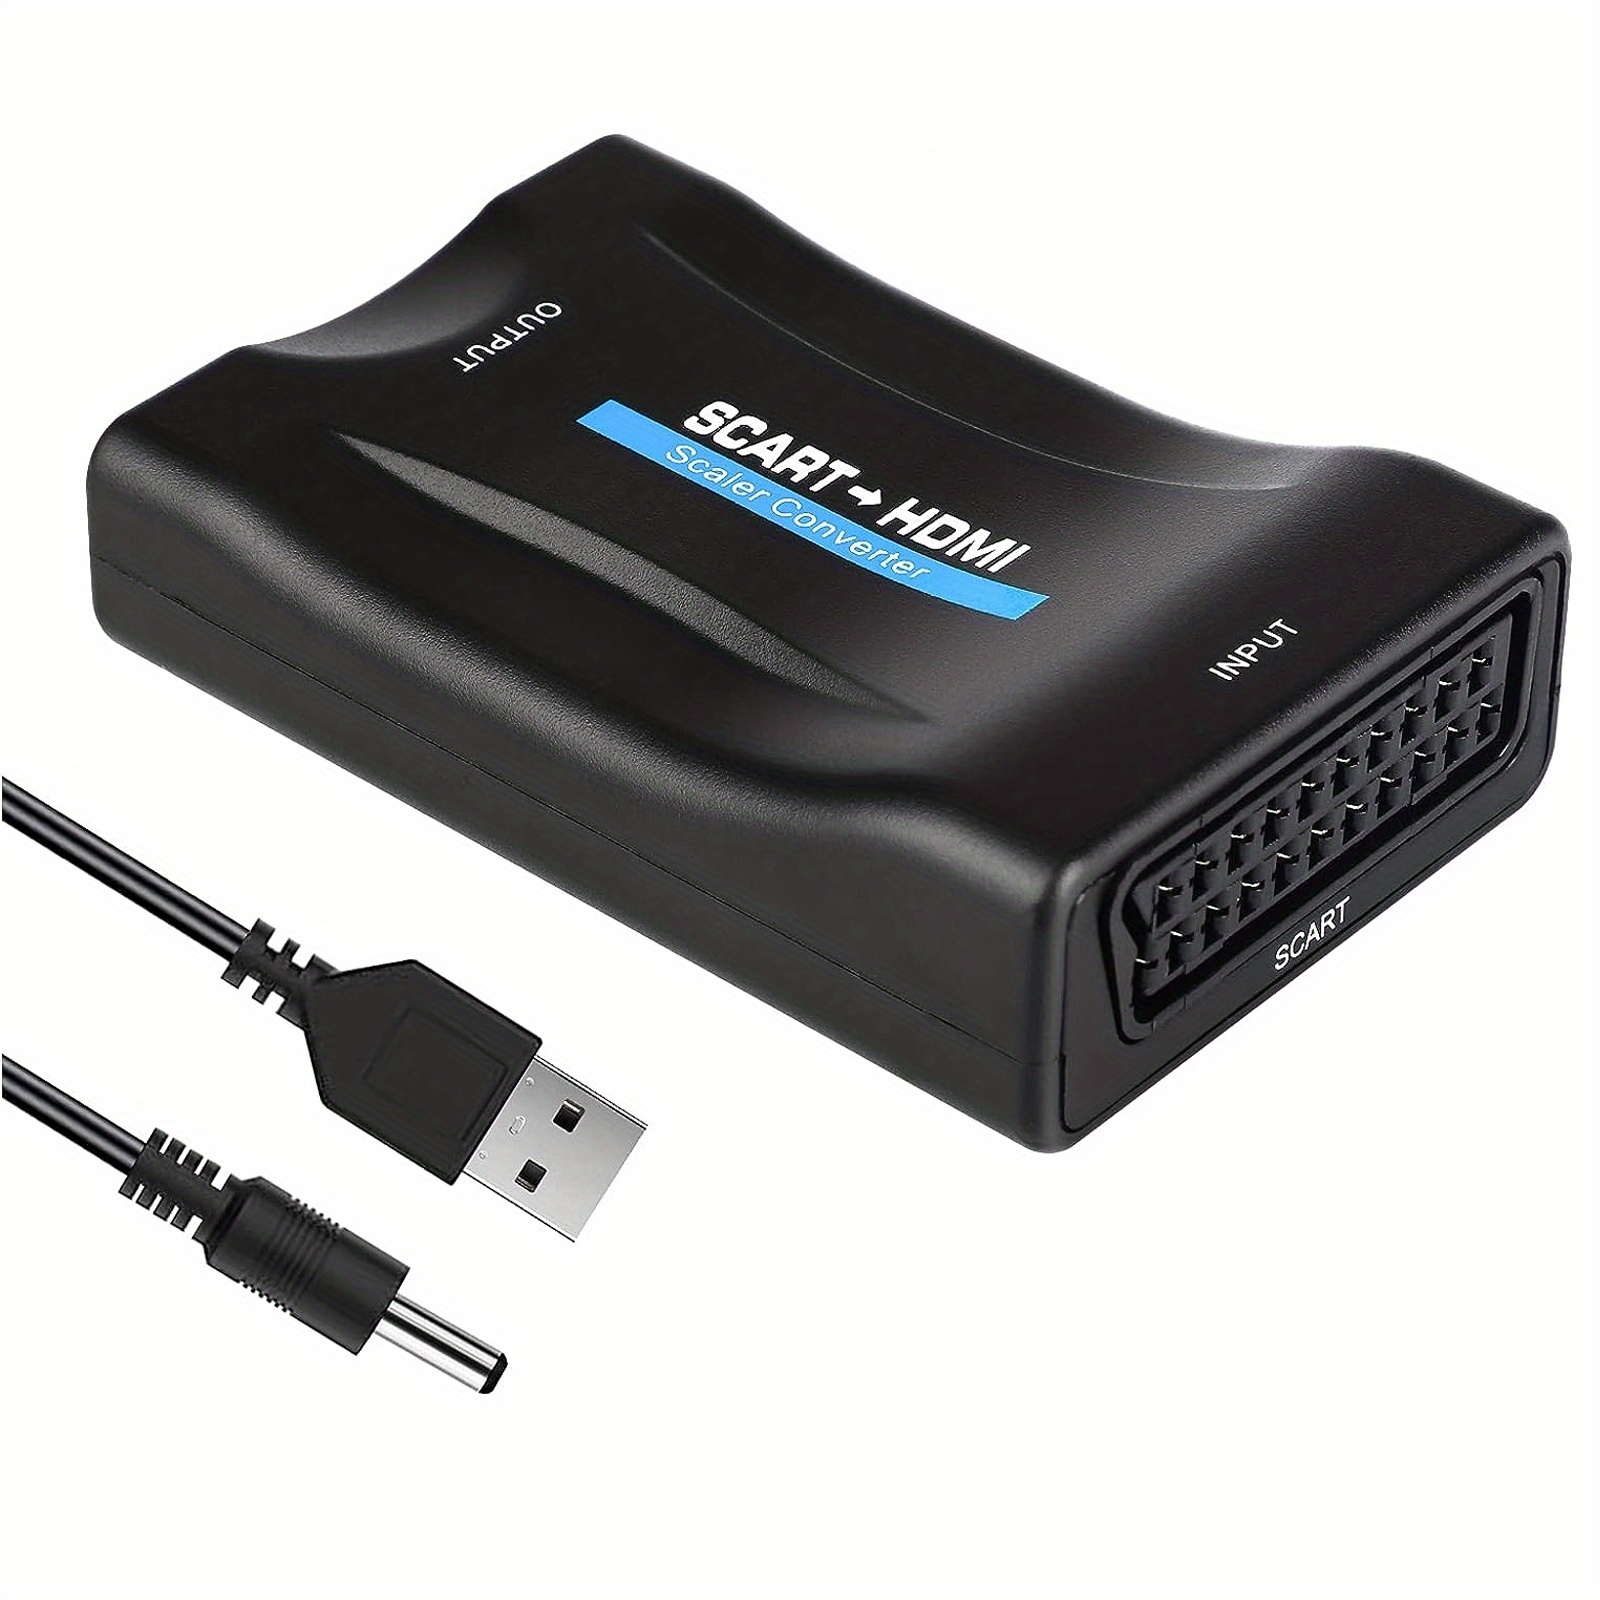 PS2: The best cheap SCART to HDMI converter 